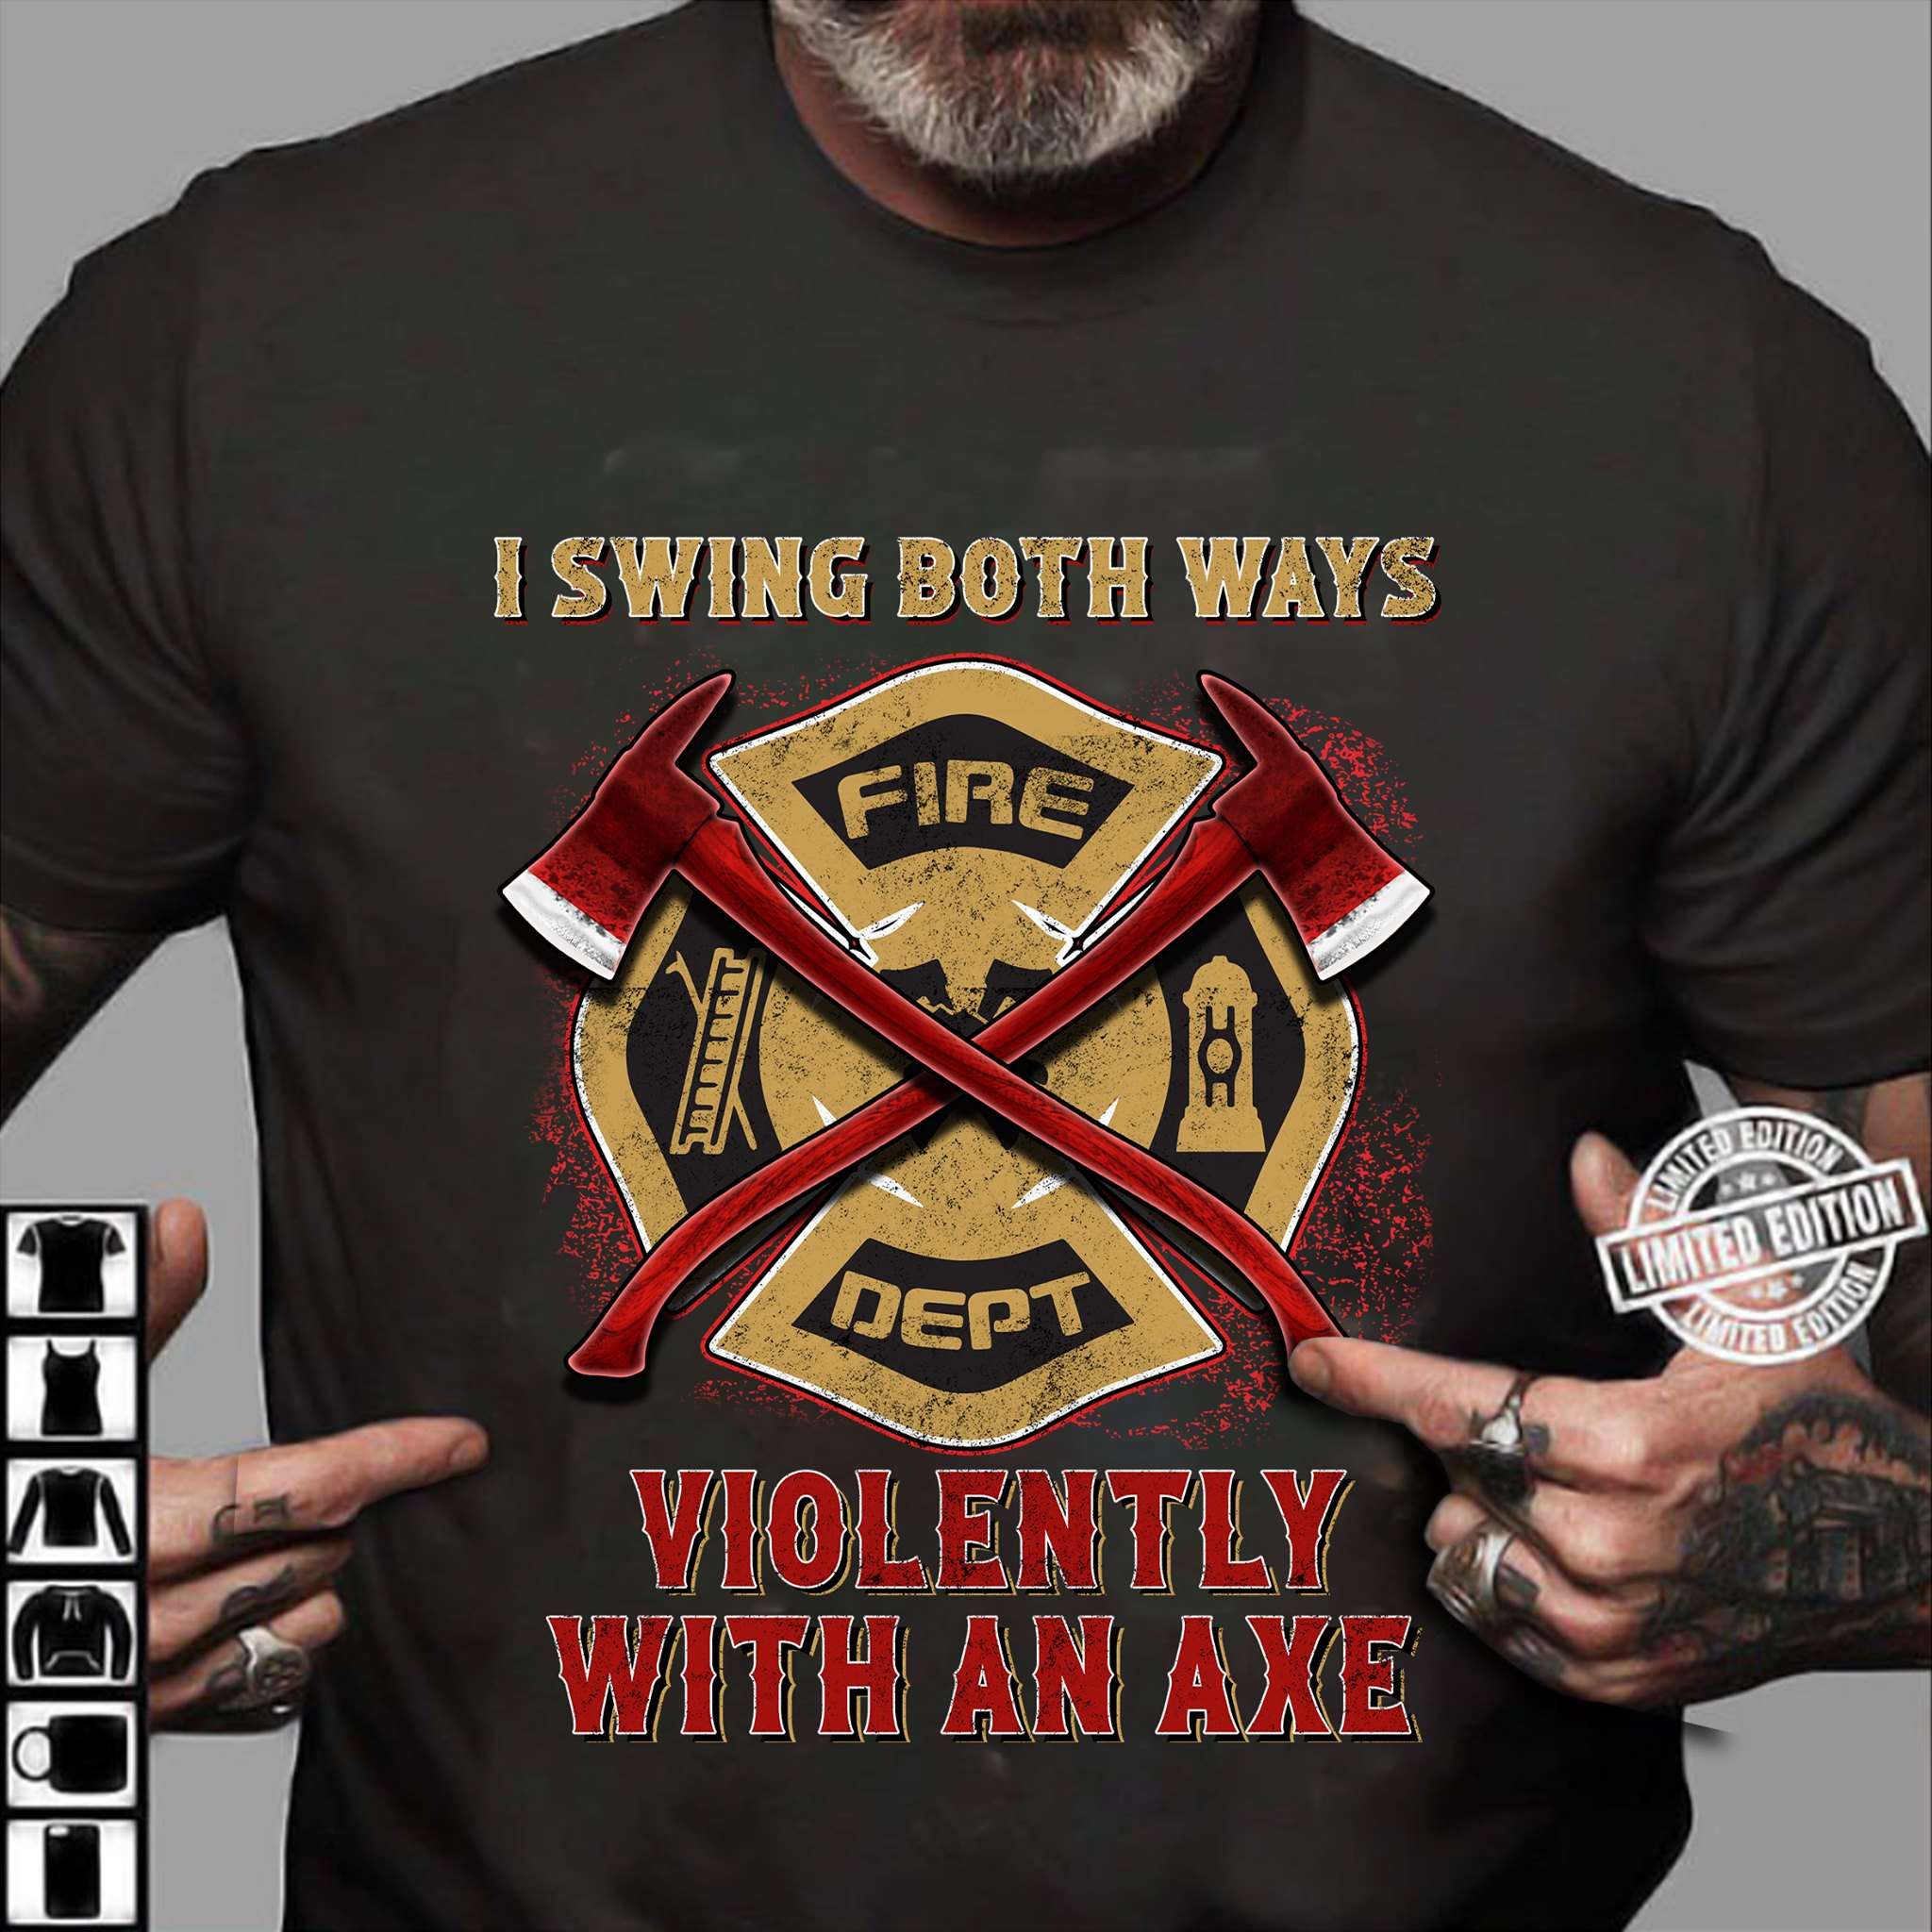 I swing both ways violently with an axe - Firefighter the job